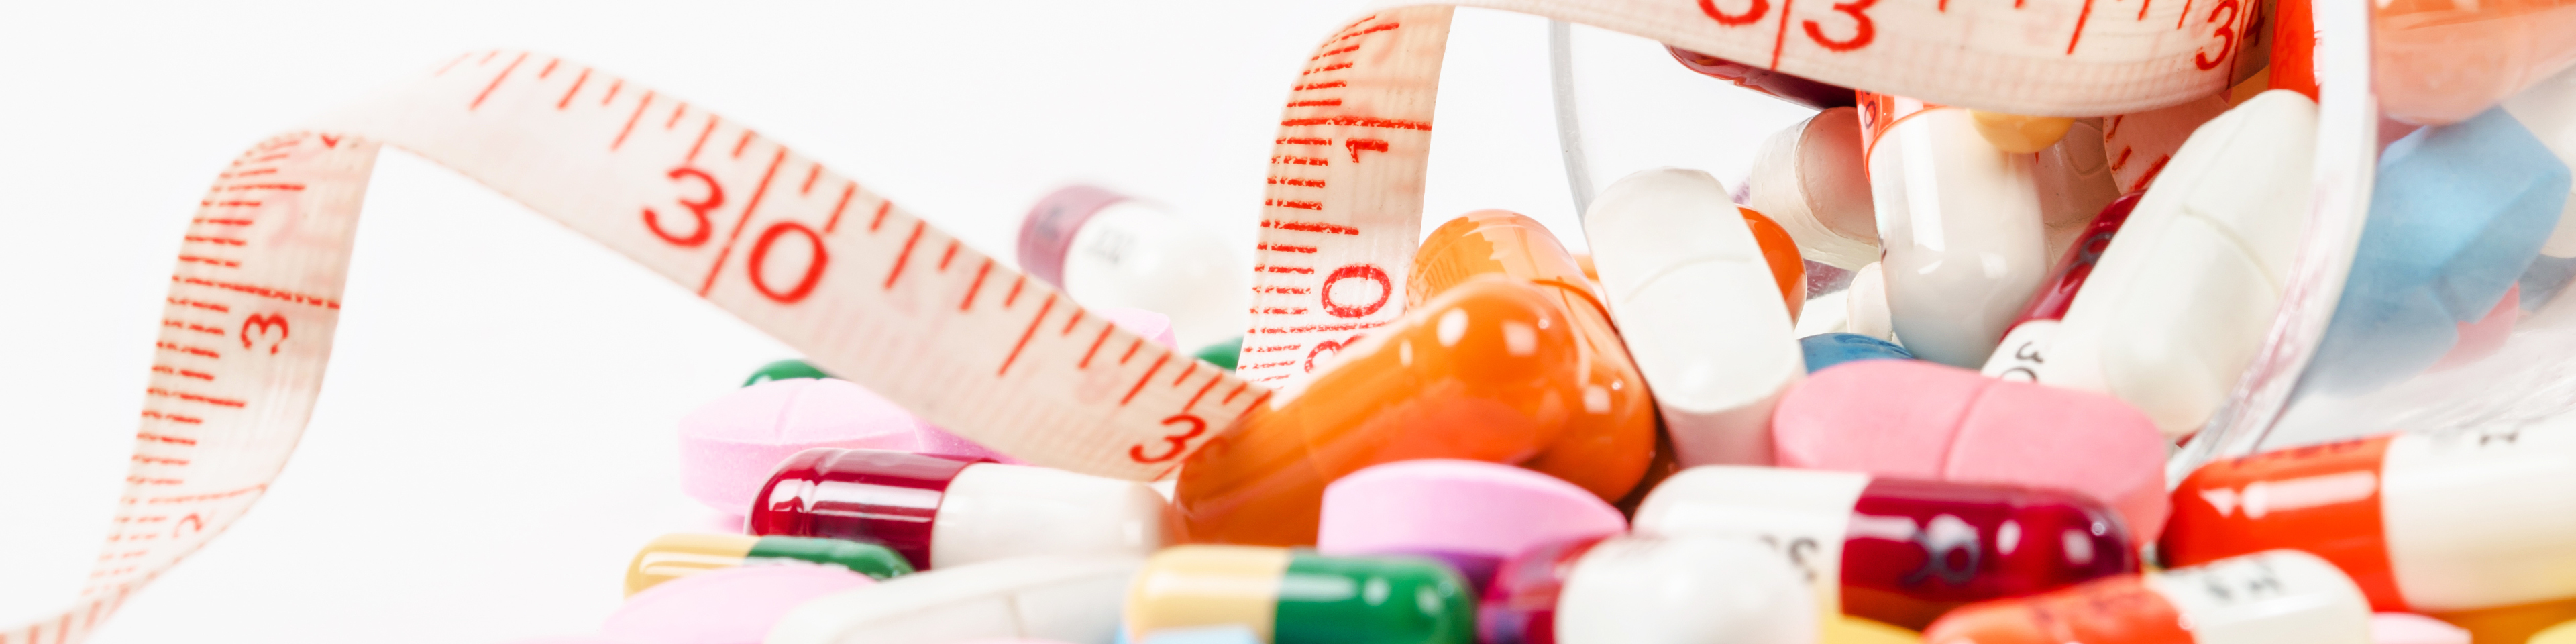 Weight-based dosing: Webinar examines clinical challenges